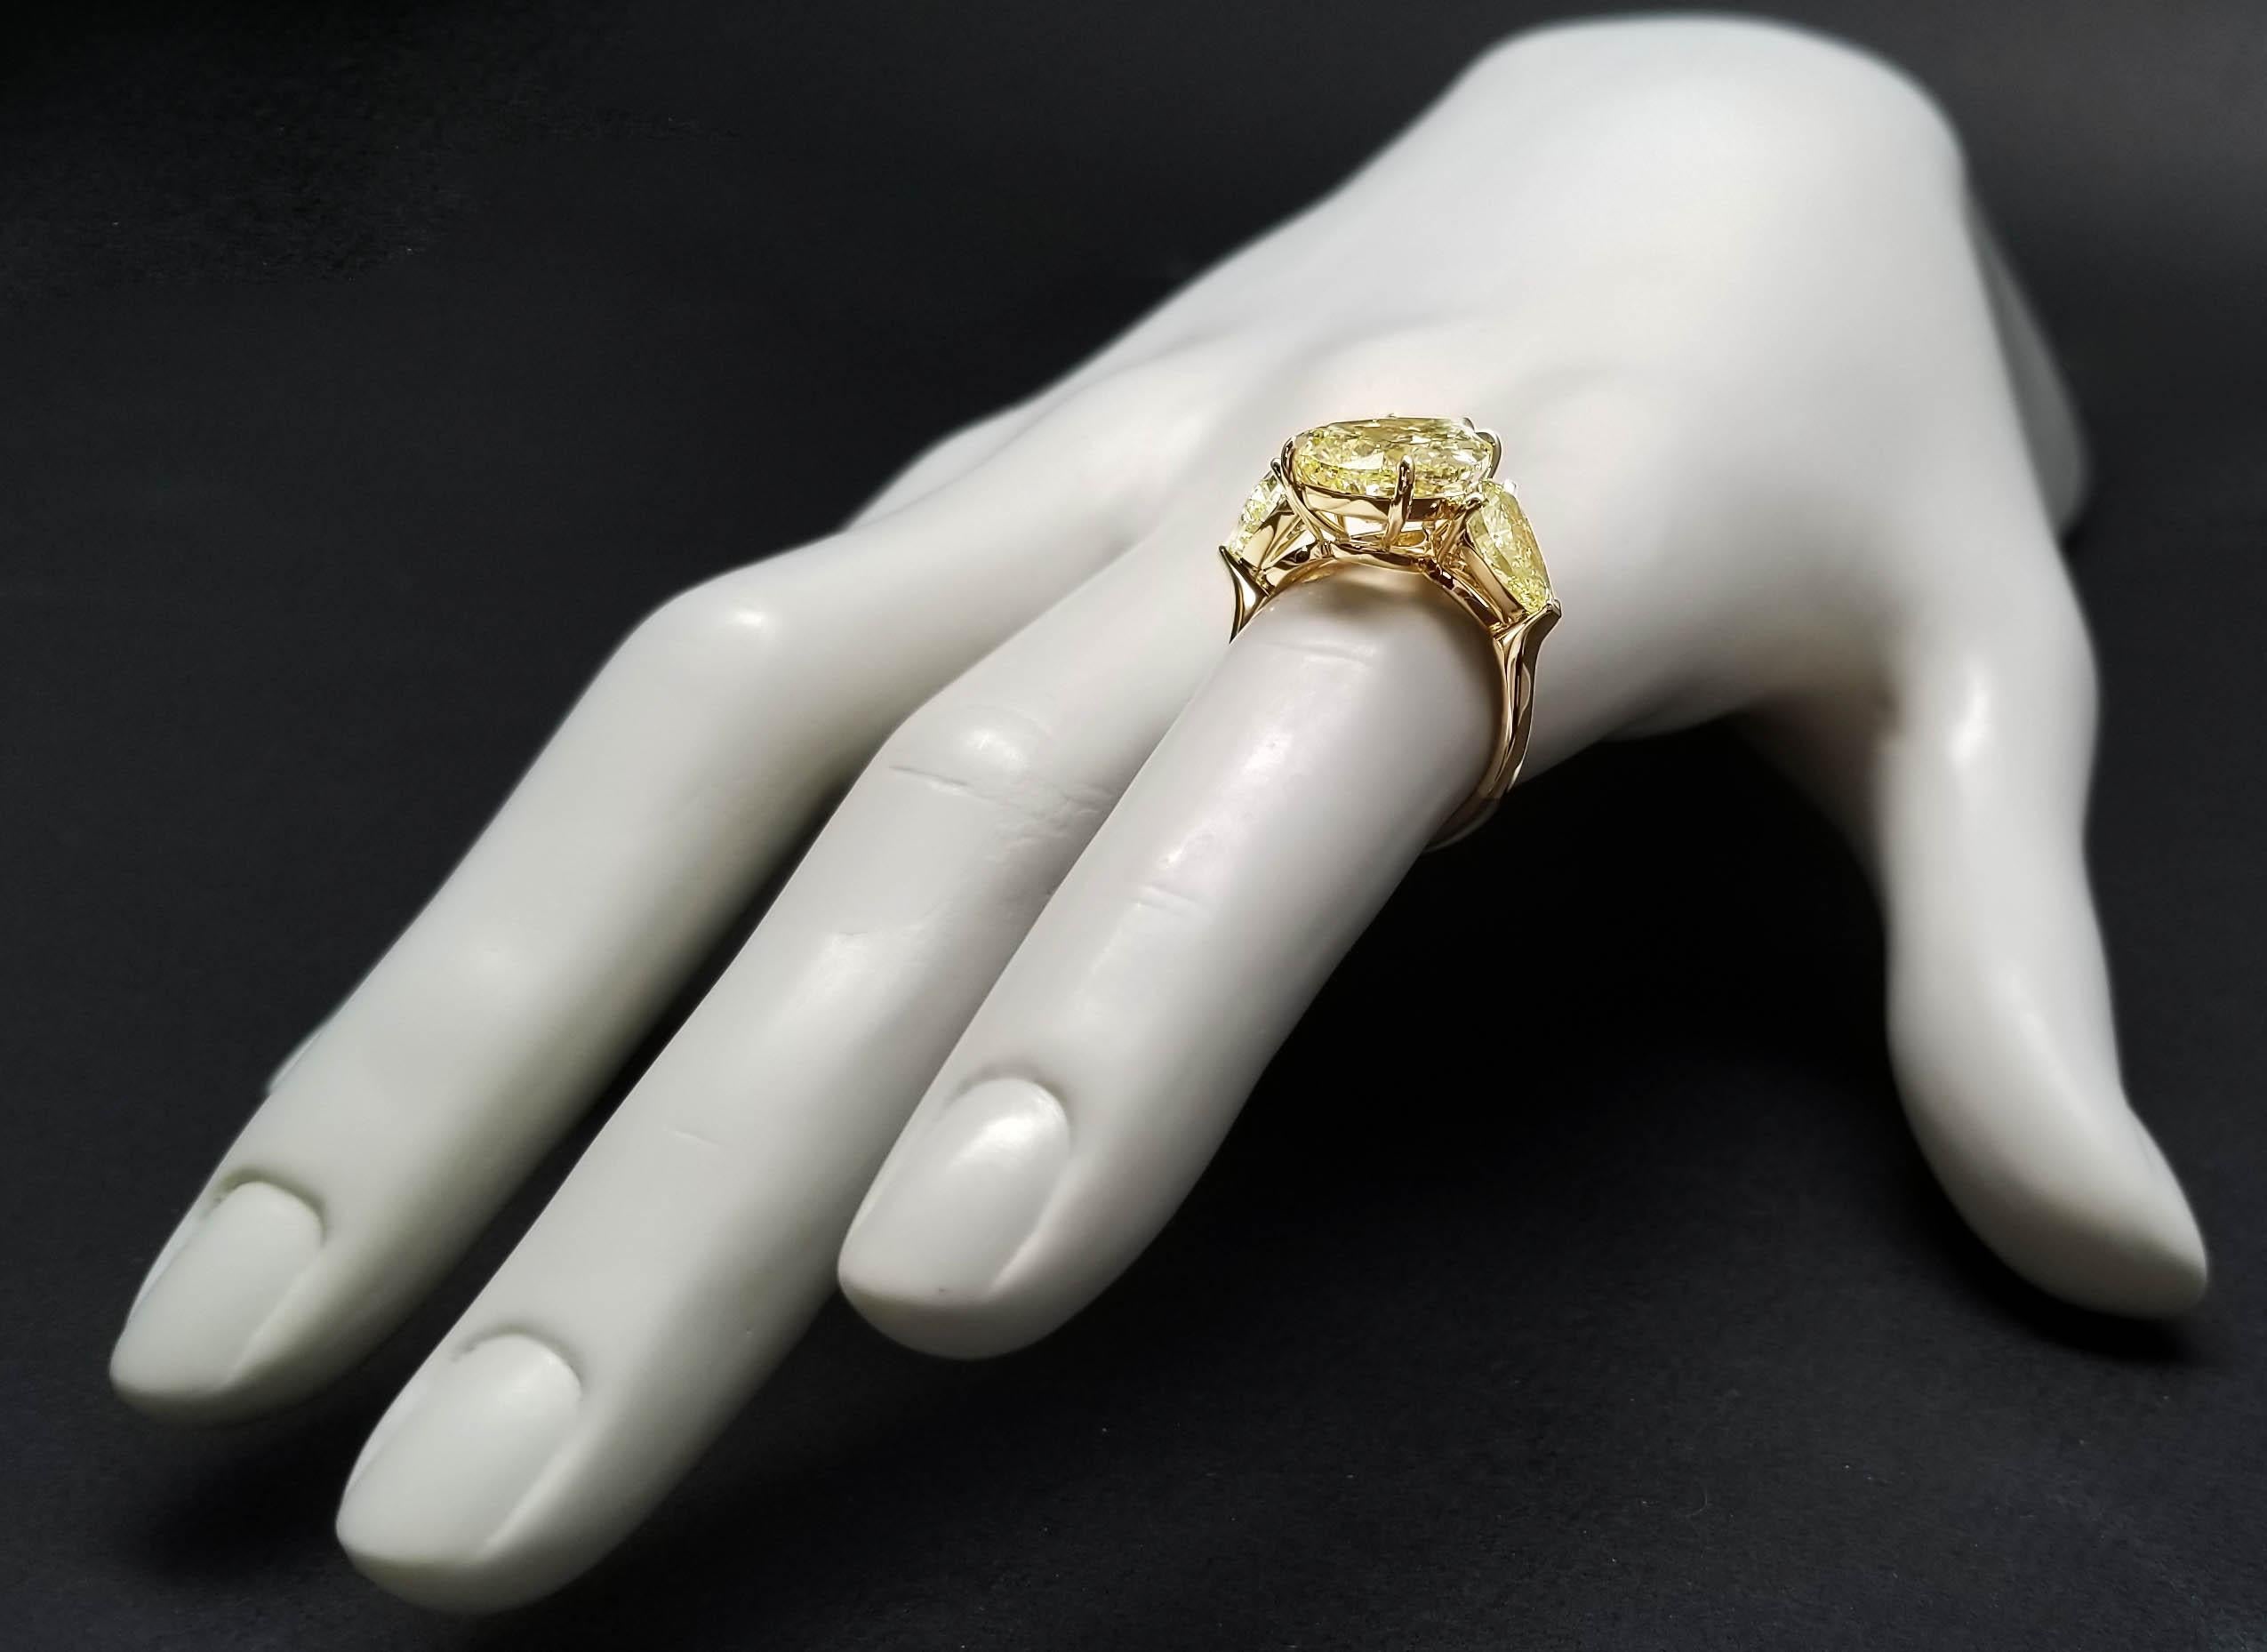 Contemporary Scarselli 6 Plus Carat Fancy Yellow Pear Shaped Diamond Ring in 18k Gold For Sale